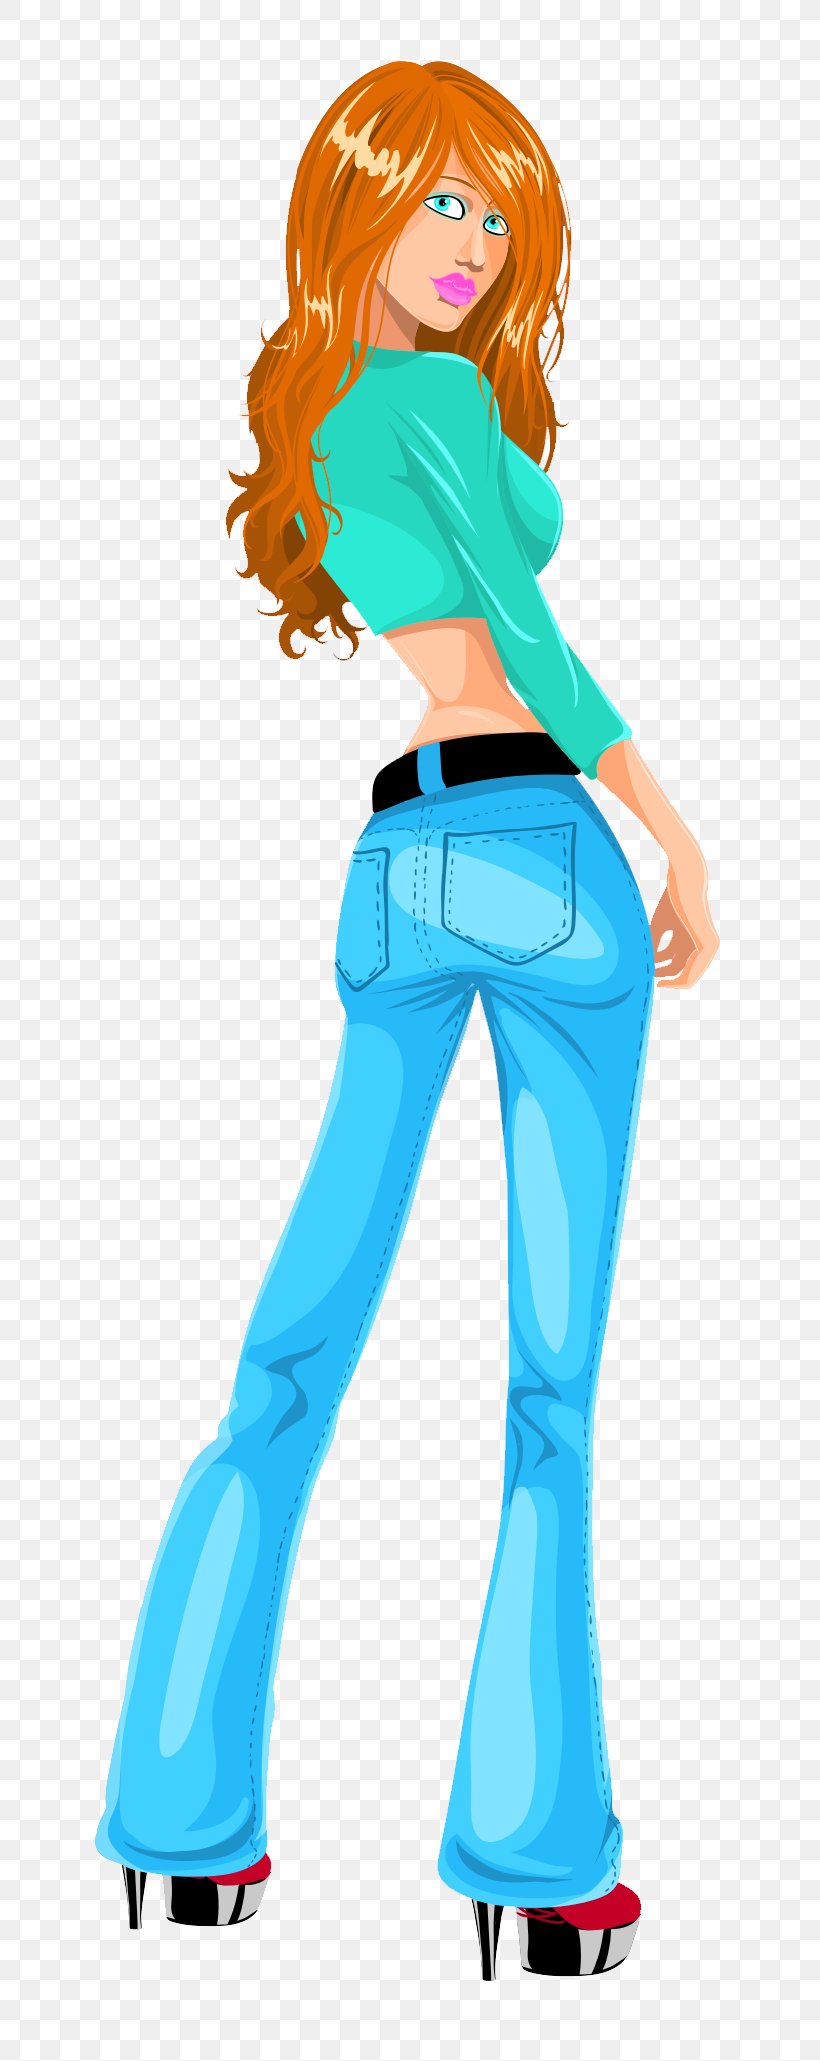 Clothing Standing Turquoise Aqua Cartoon, PNG, 747x2061px, Clothing, Aqua, Cartoon, Fashion Illustration, Jeans Download Free